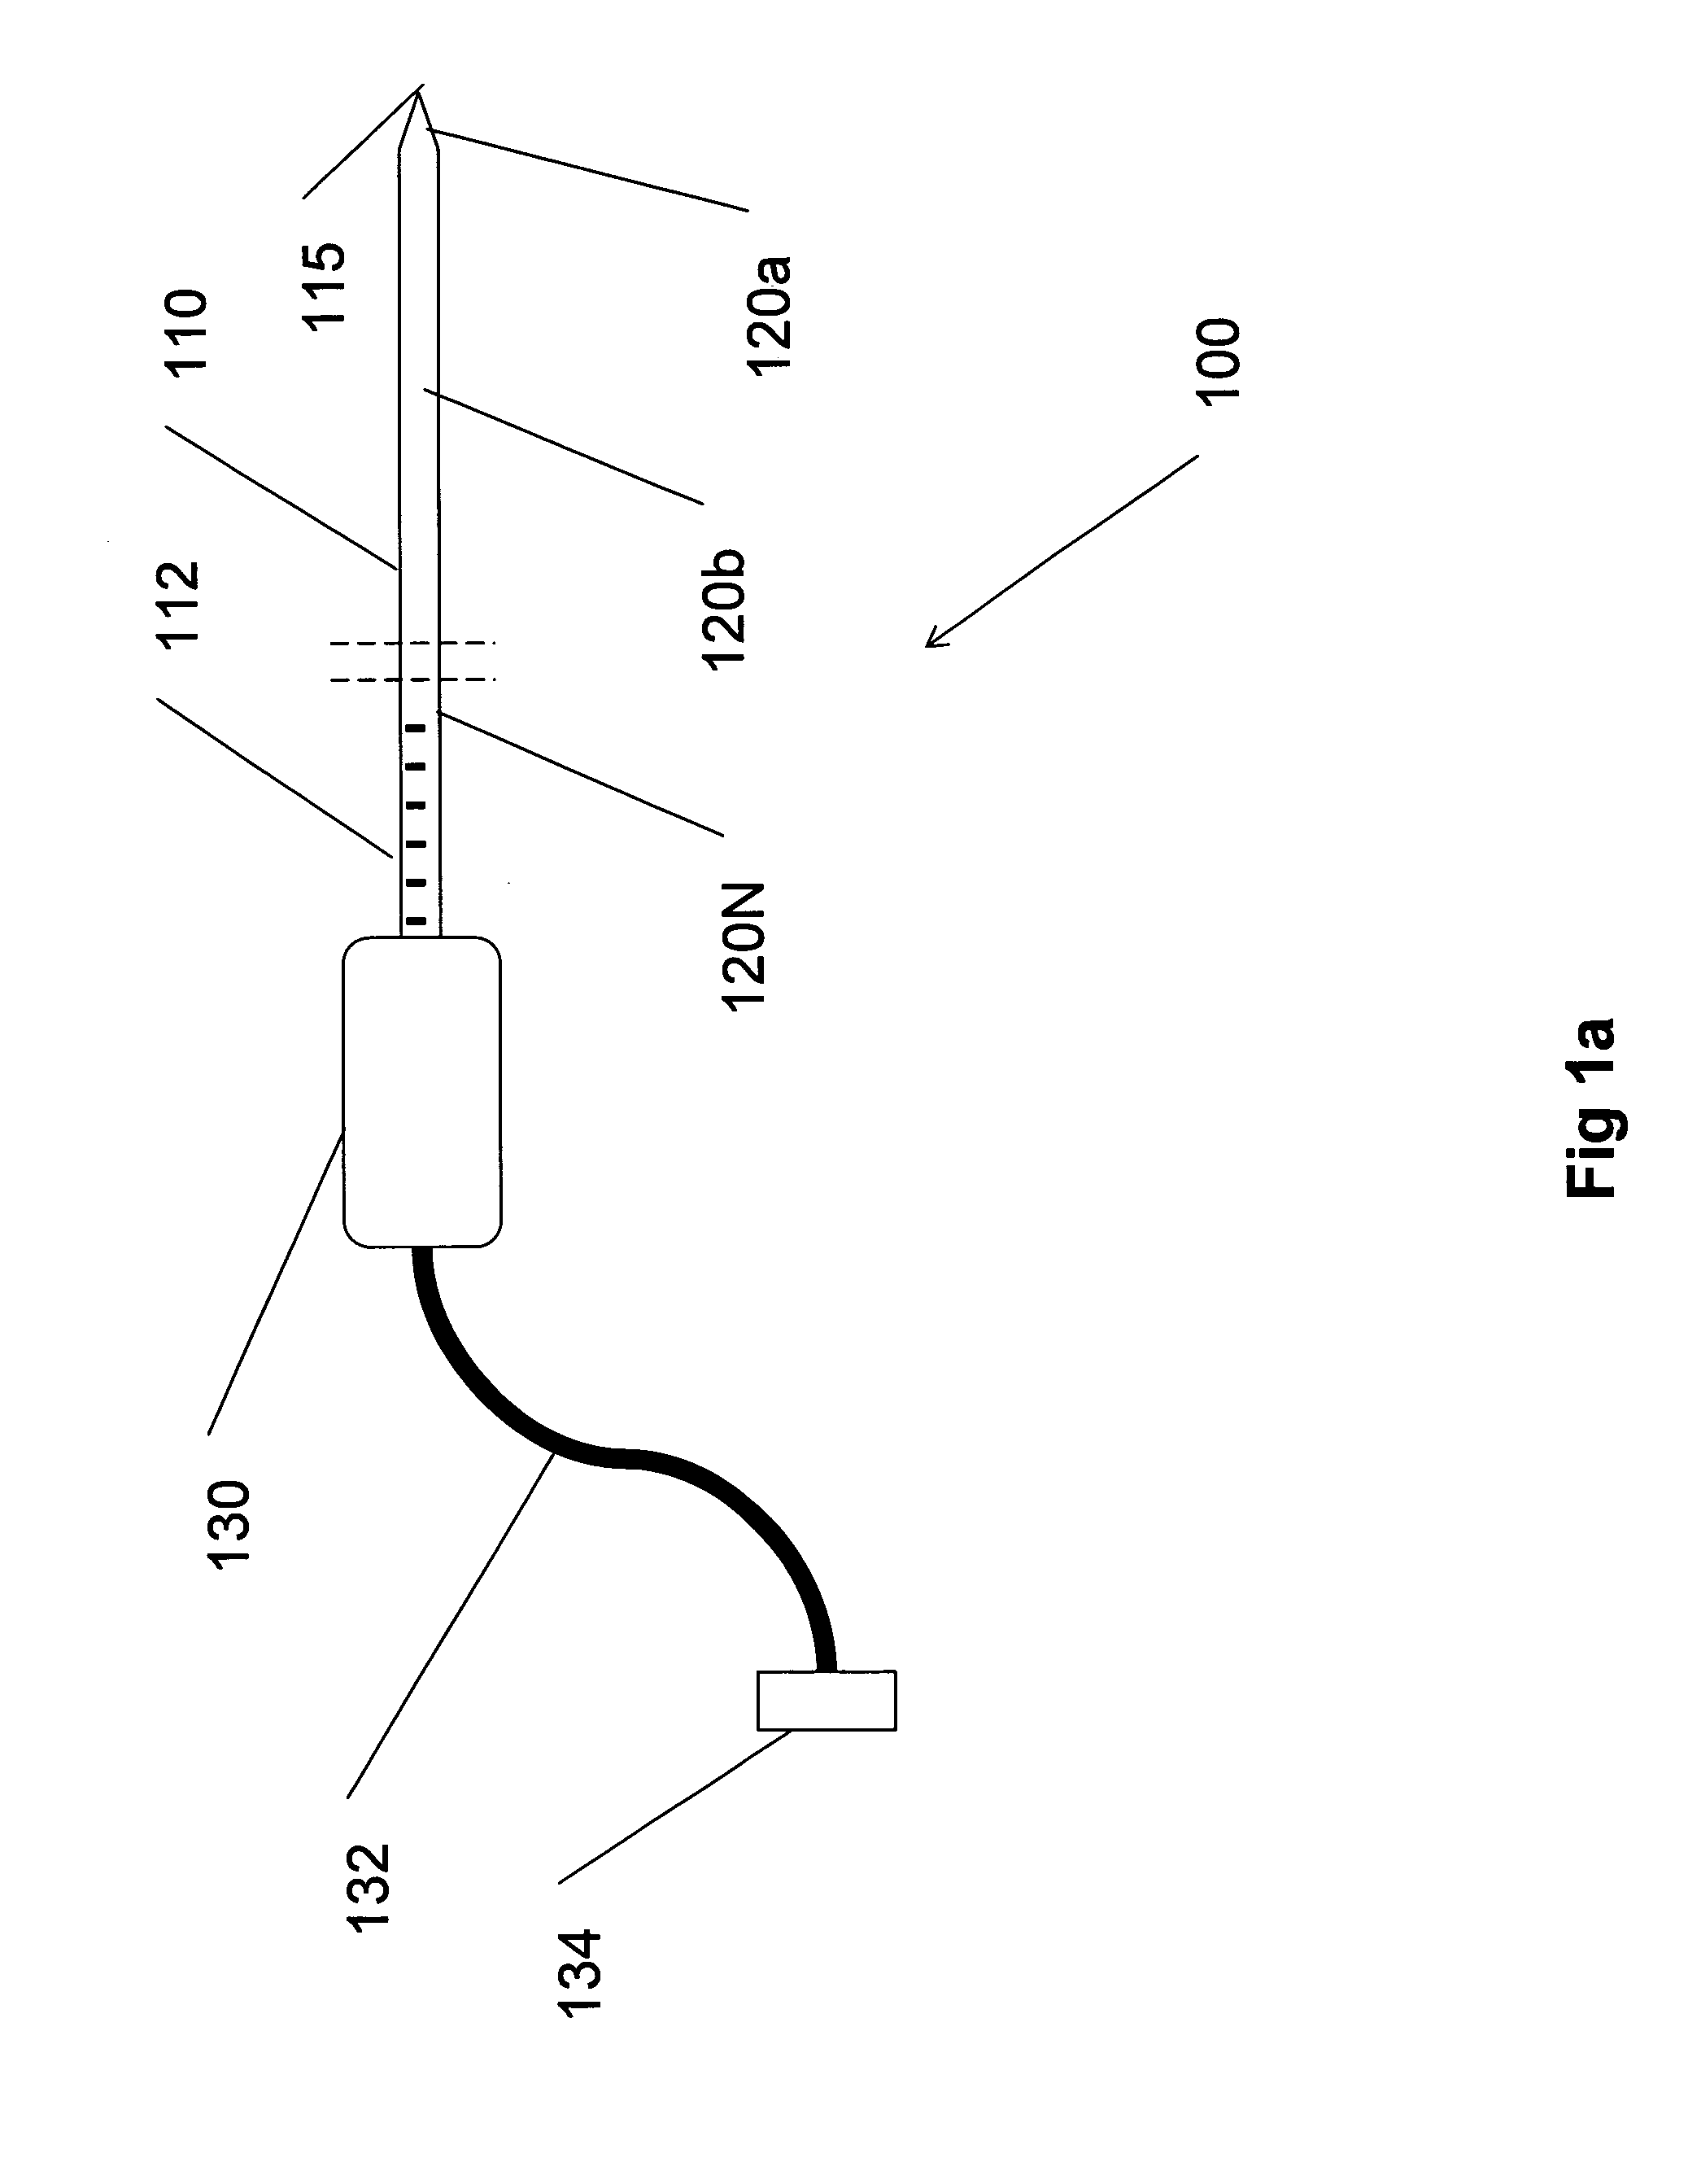 Multiple sensor device for measuring tissue temperature during thermal treatment